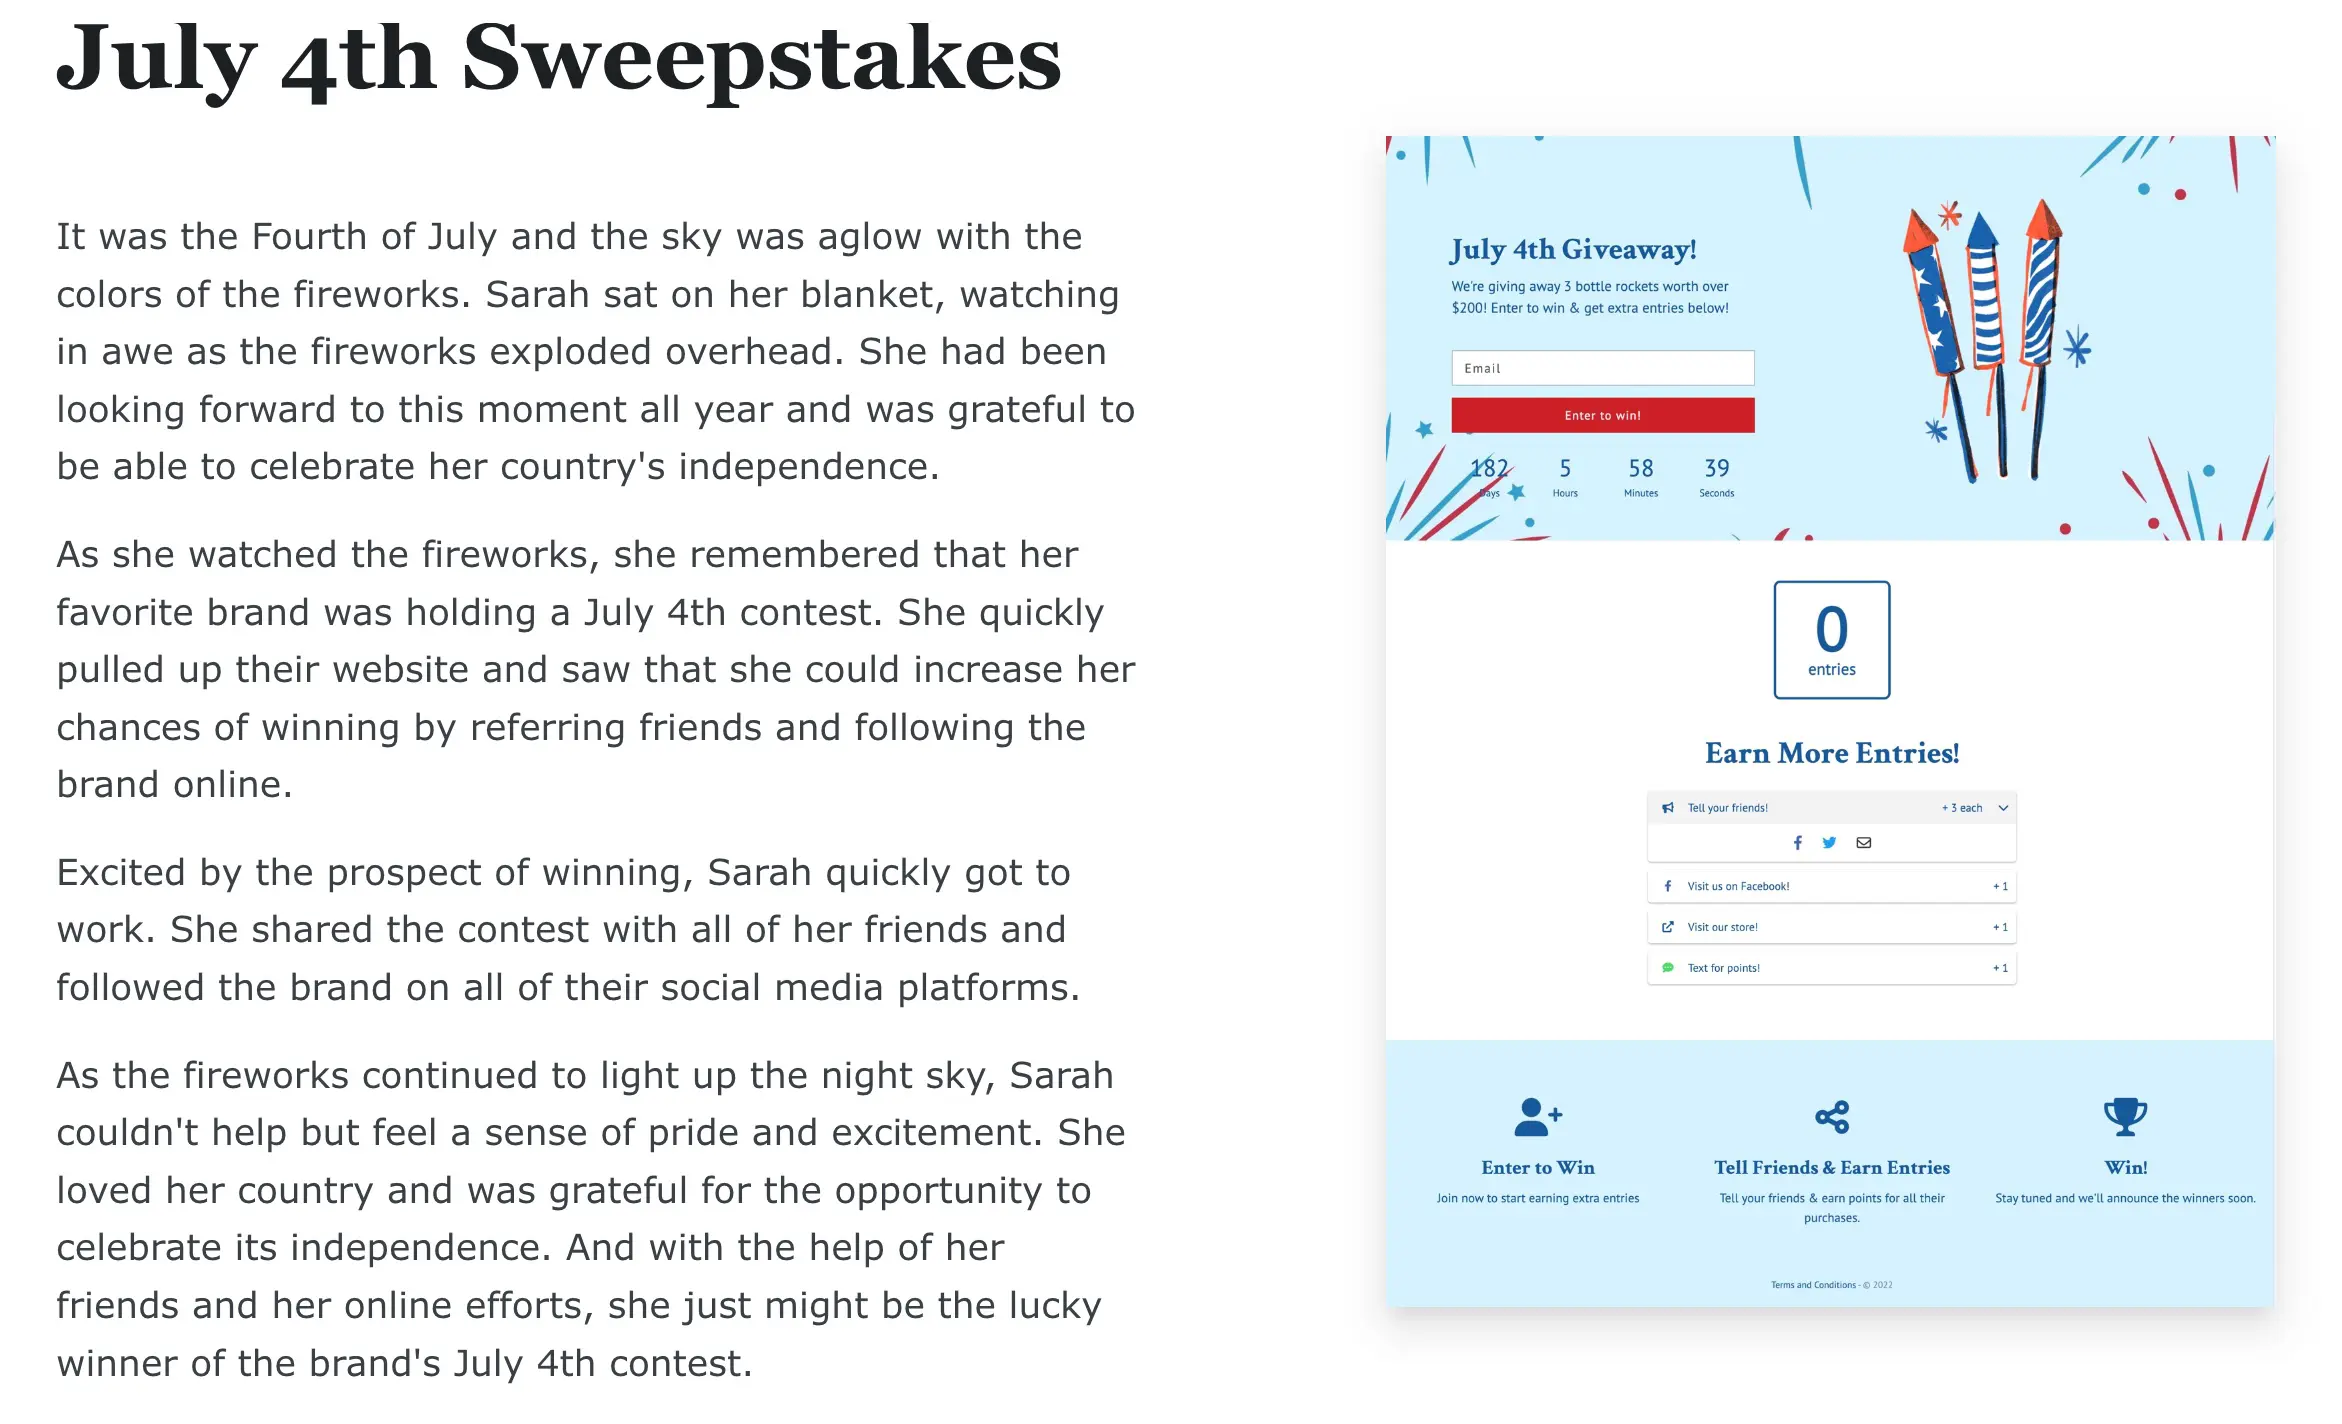 Short story example written by AI for our landing pages.